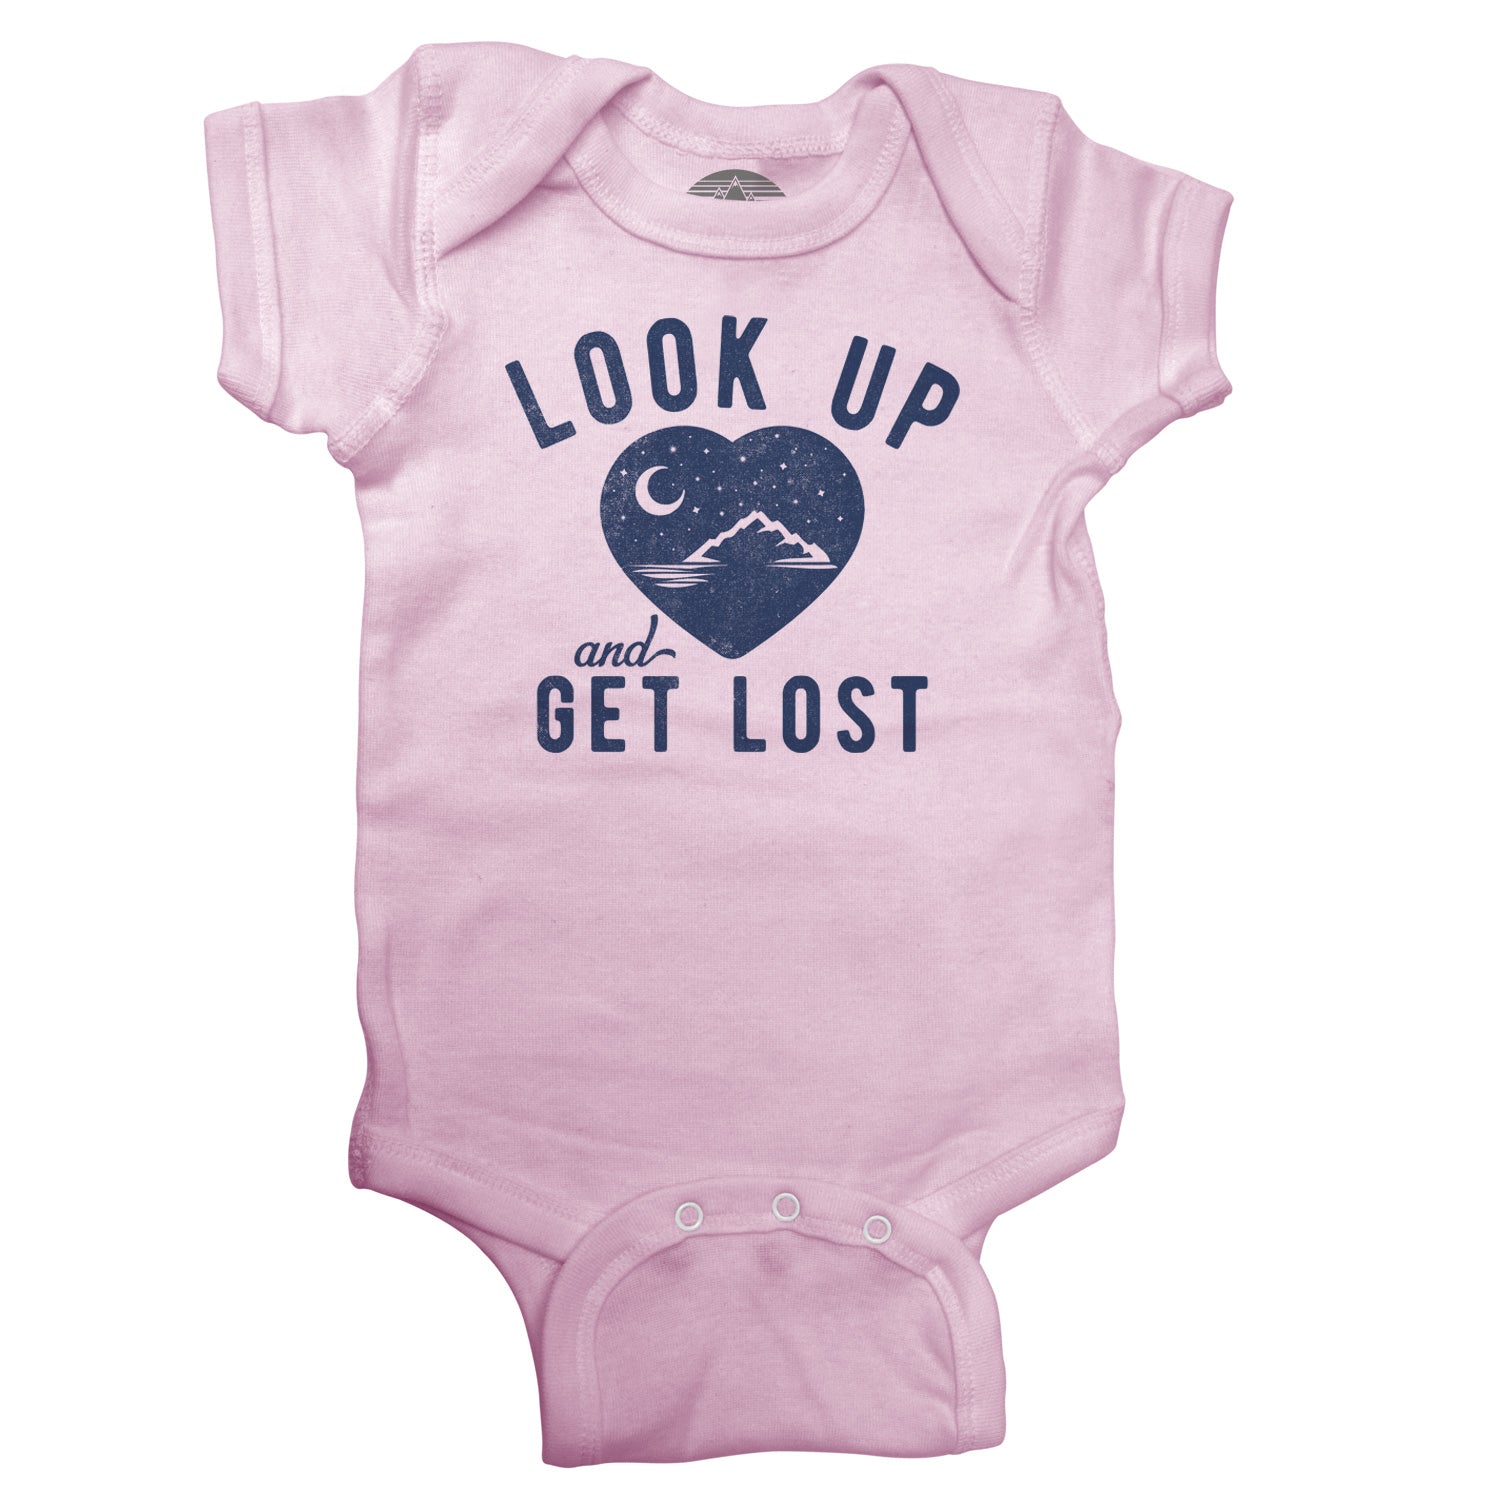 Look Up and Get Lost Infant Bodysuit - Unisex Fit